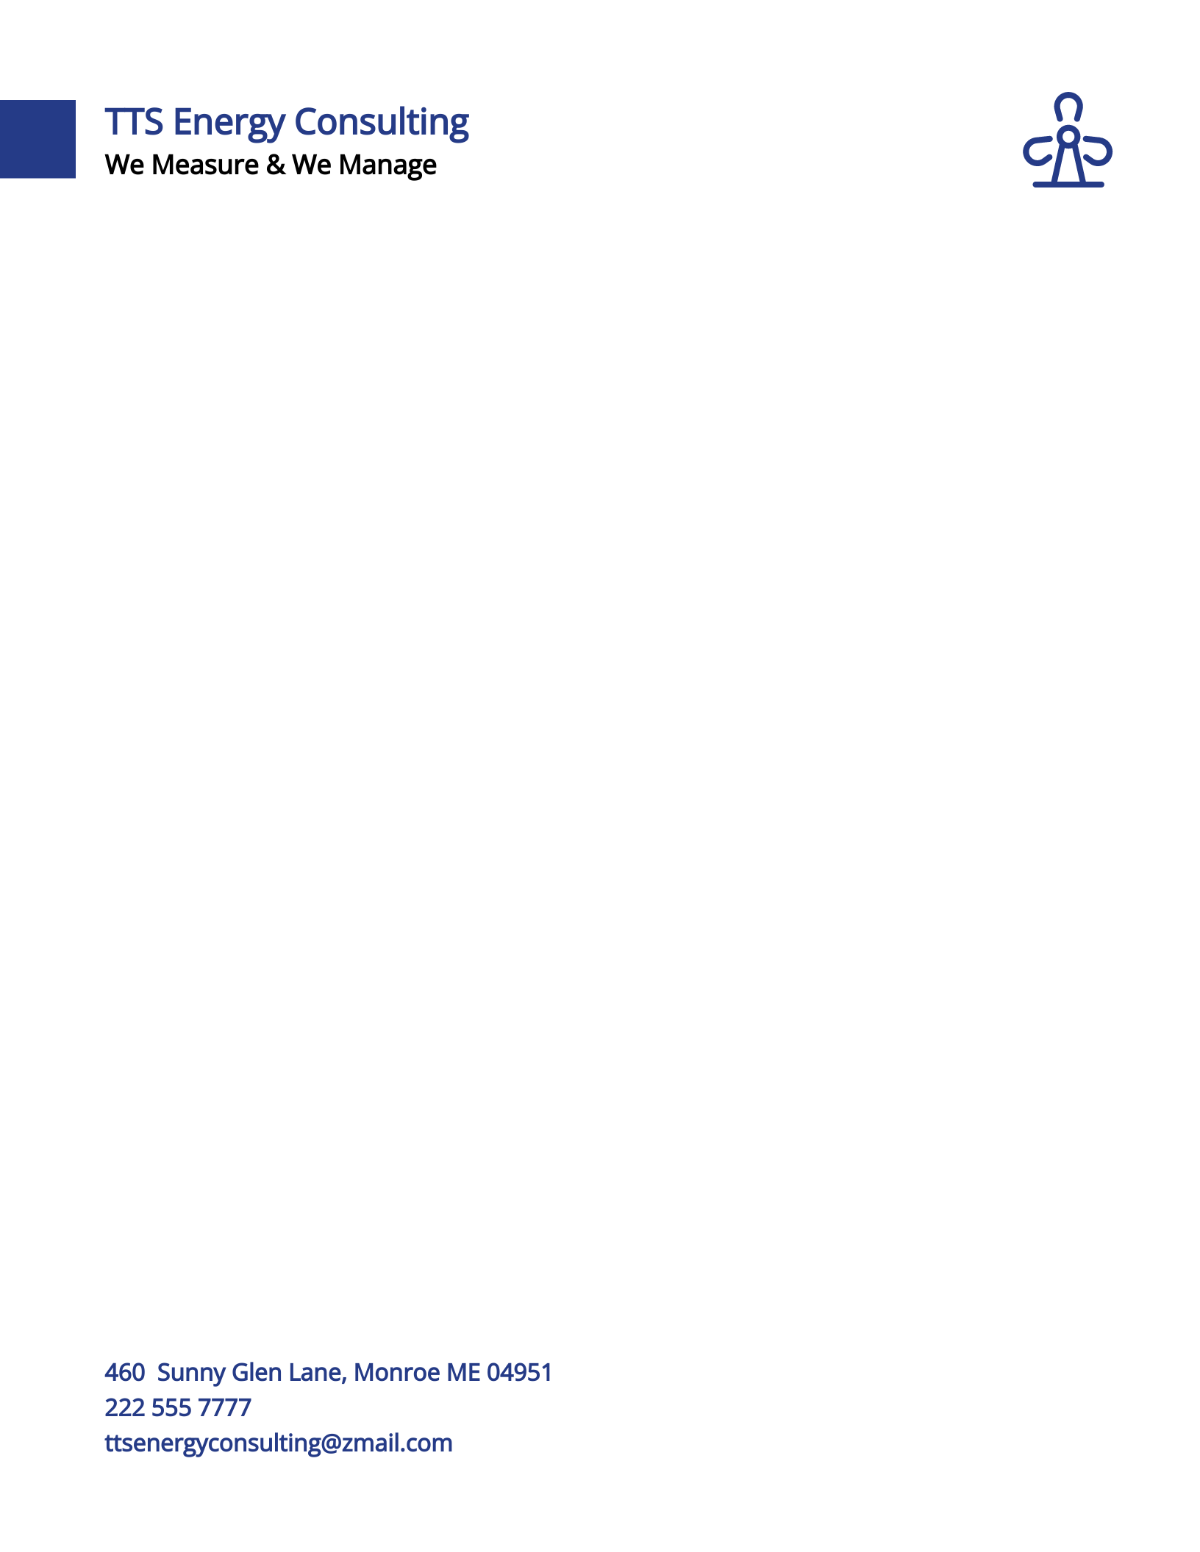 Energy Consulting Letterhead Template